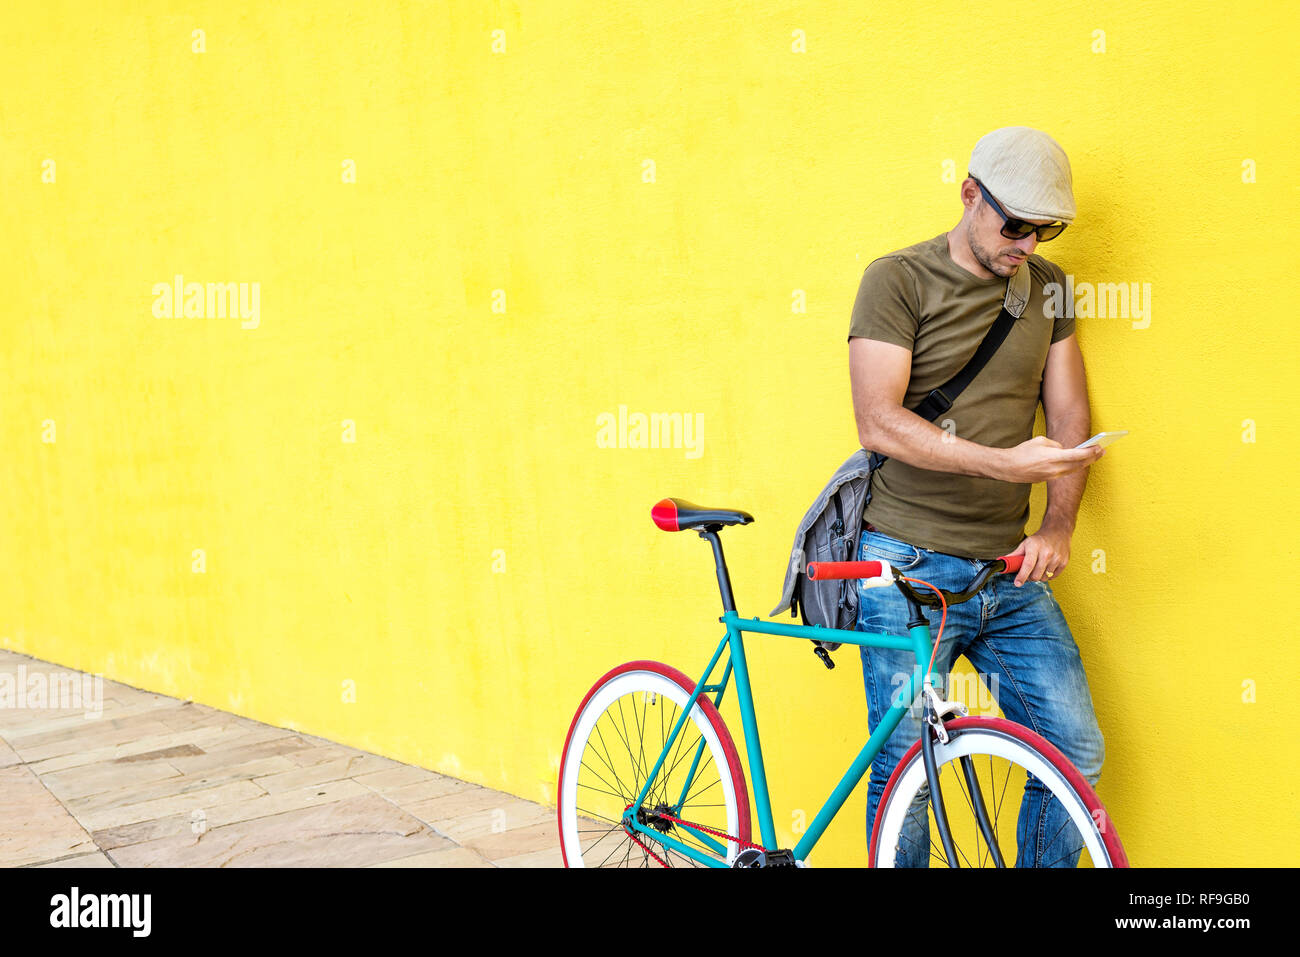 Side view of a young man with a vintage bike and wearing casual clothes and sunglasses standing against a yellow wall while using a mobile phone in a  Stock Photo